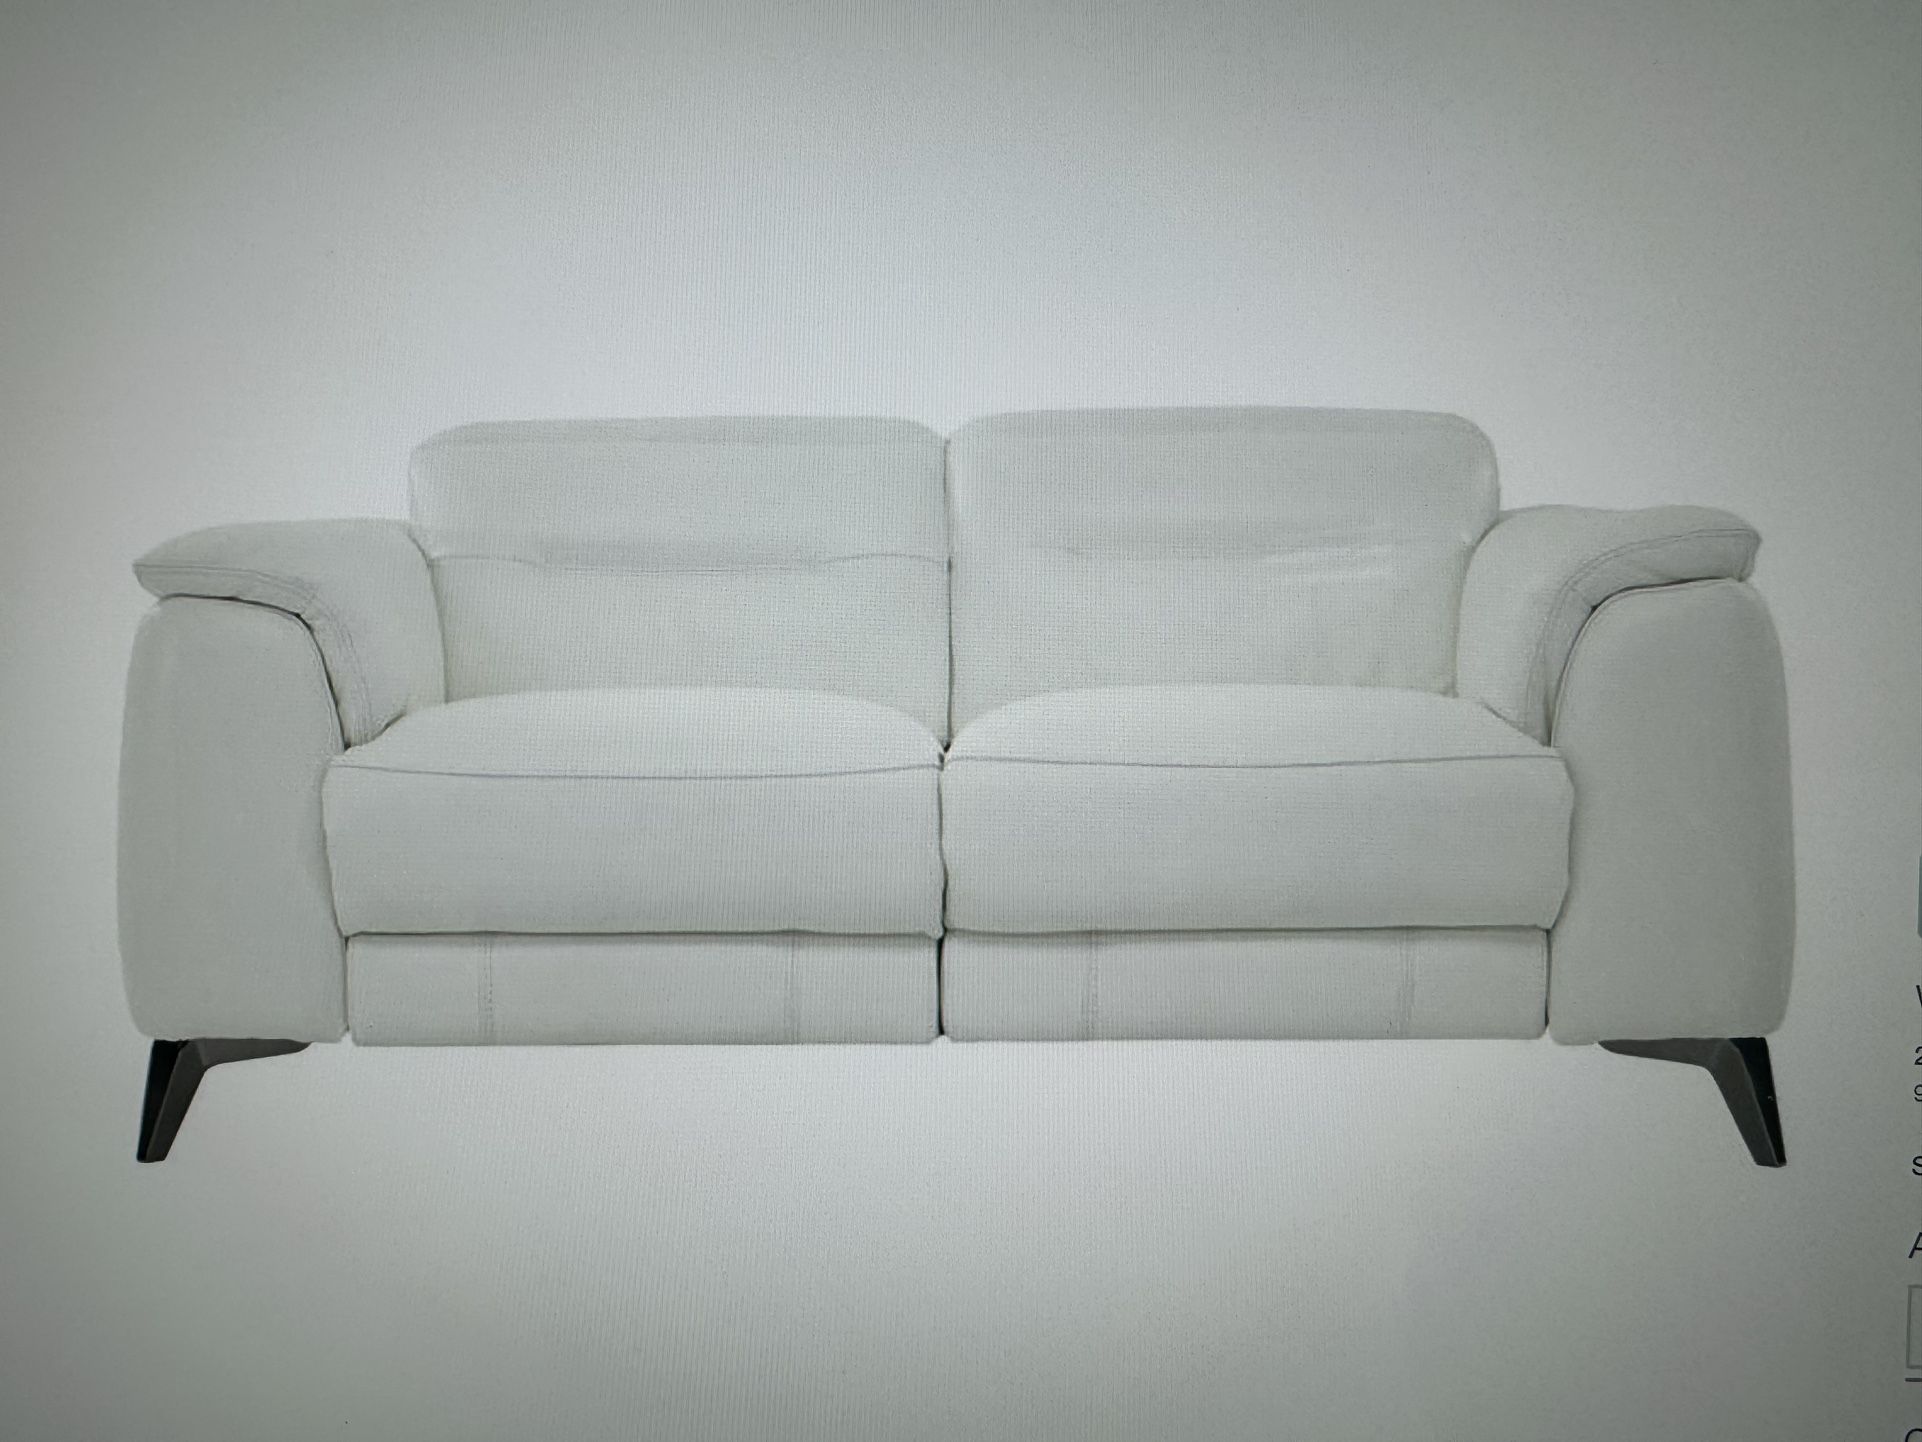 Anabel White Leather Power Reclining Loveseat